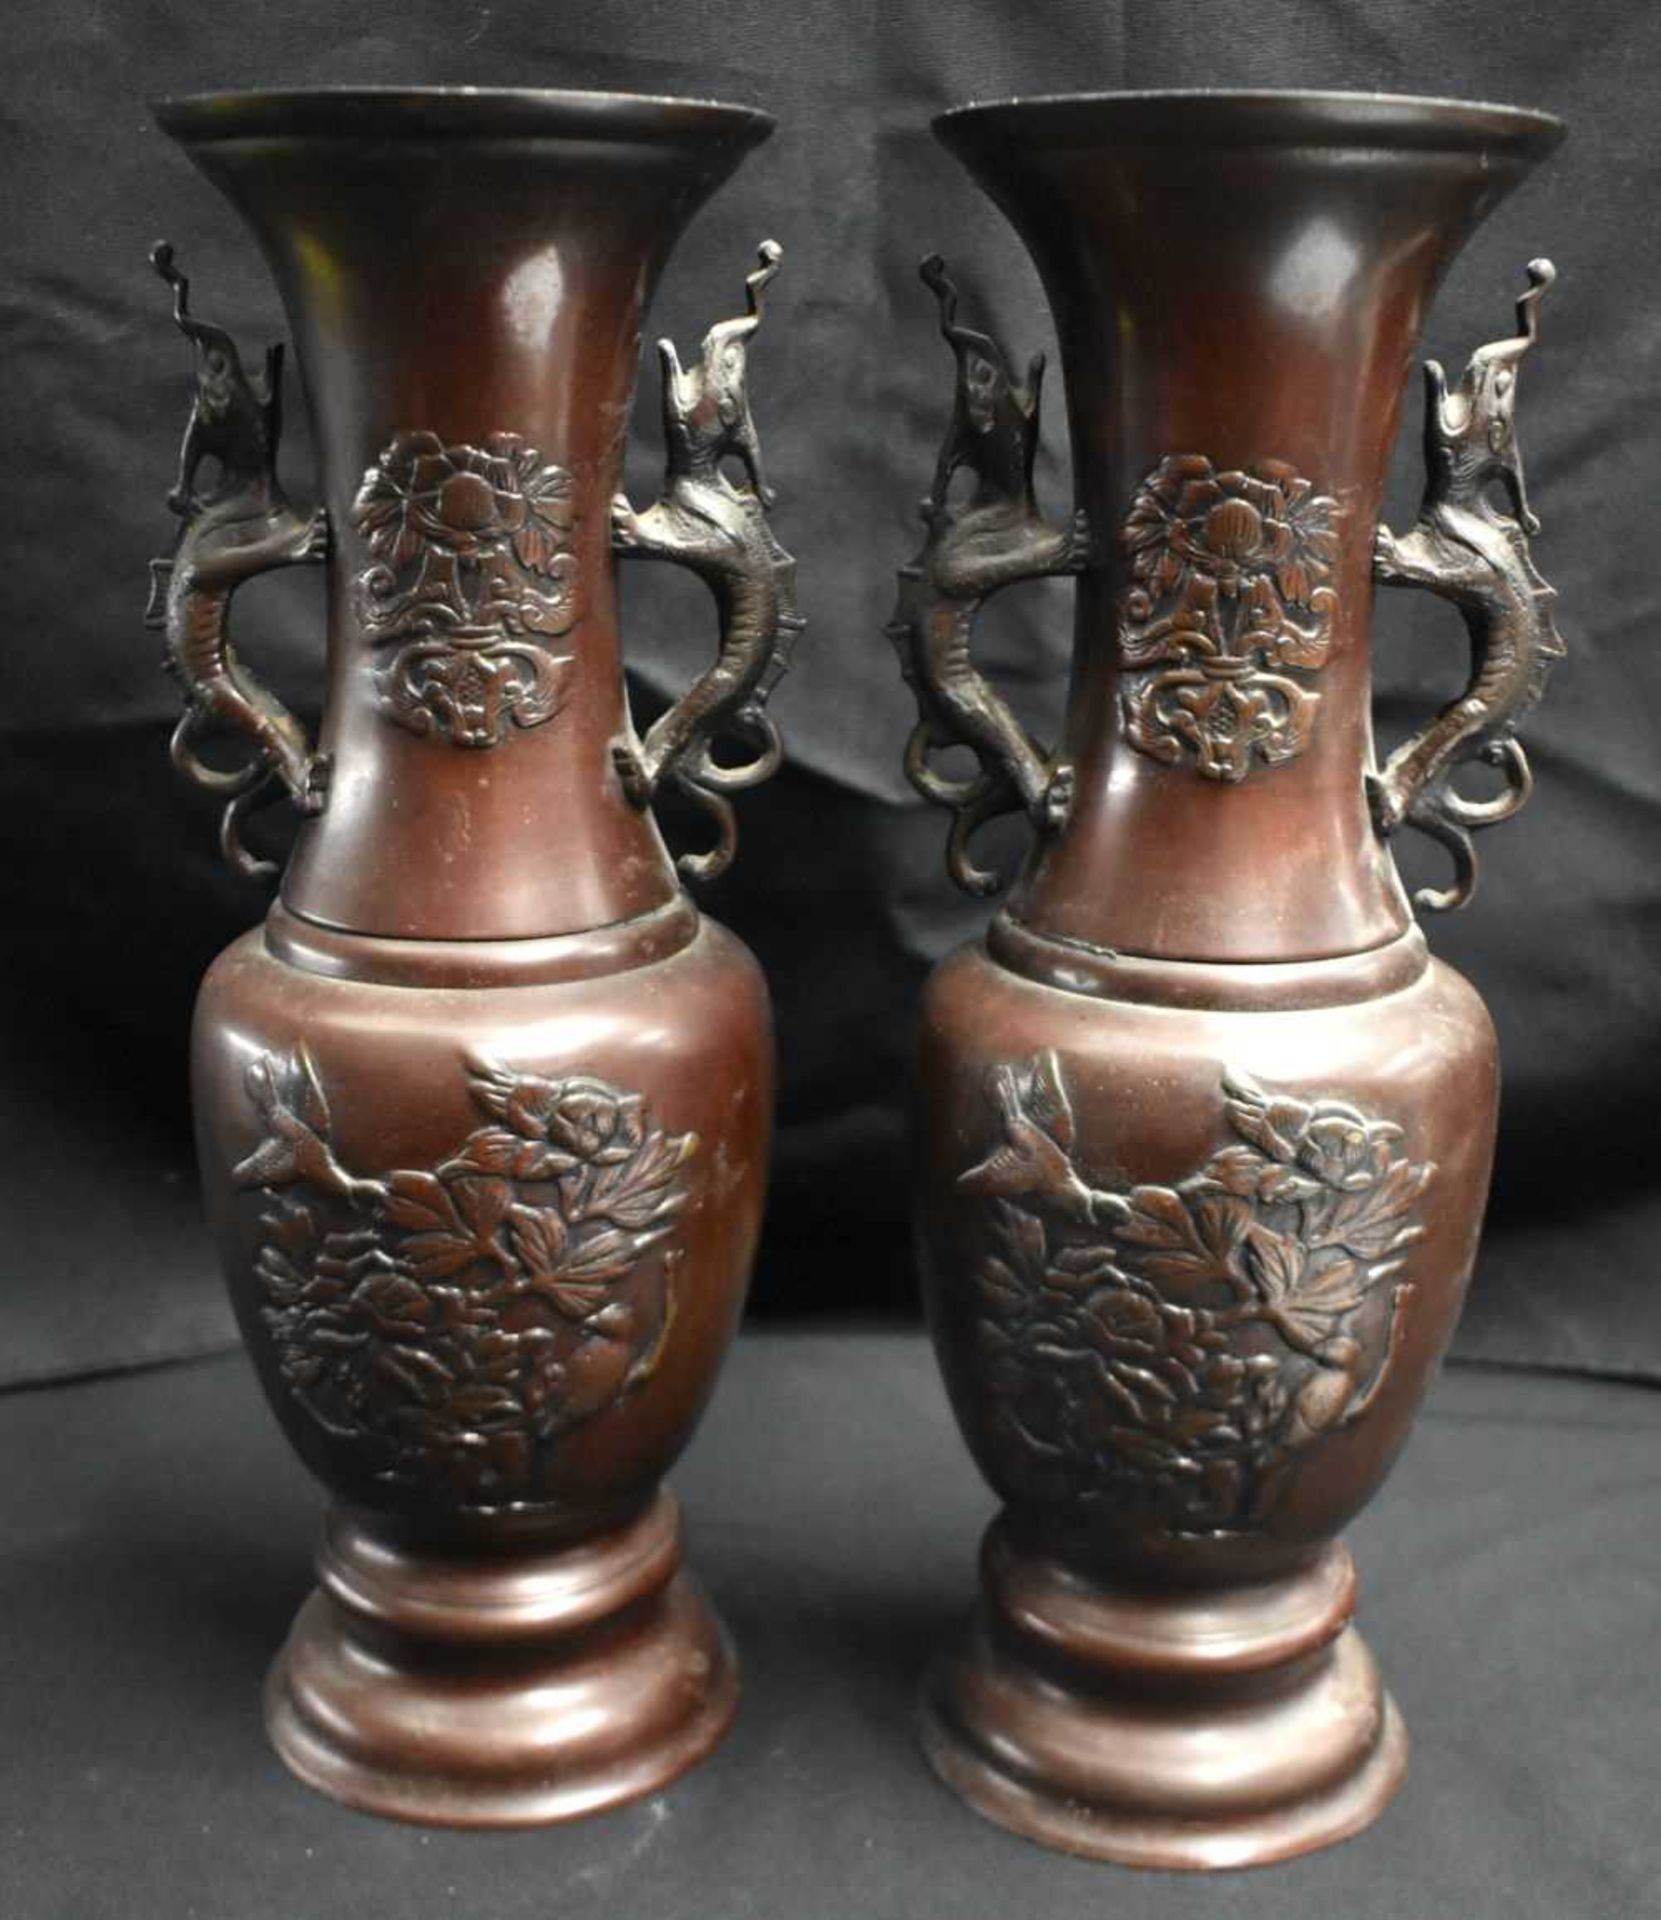 A LARGE PAIR OF 19TH CENTURY JAPANESE MEIJI PERIOD BRONZE VASES decorated with birds and foliage. 35 - Image 6 of 8